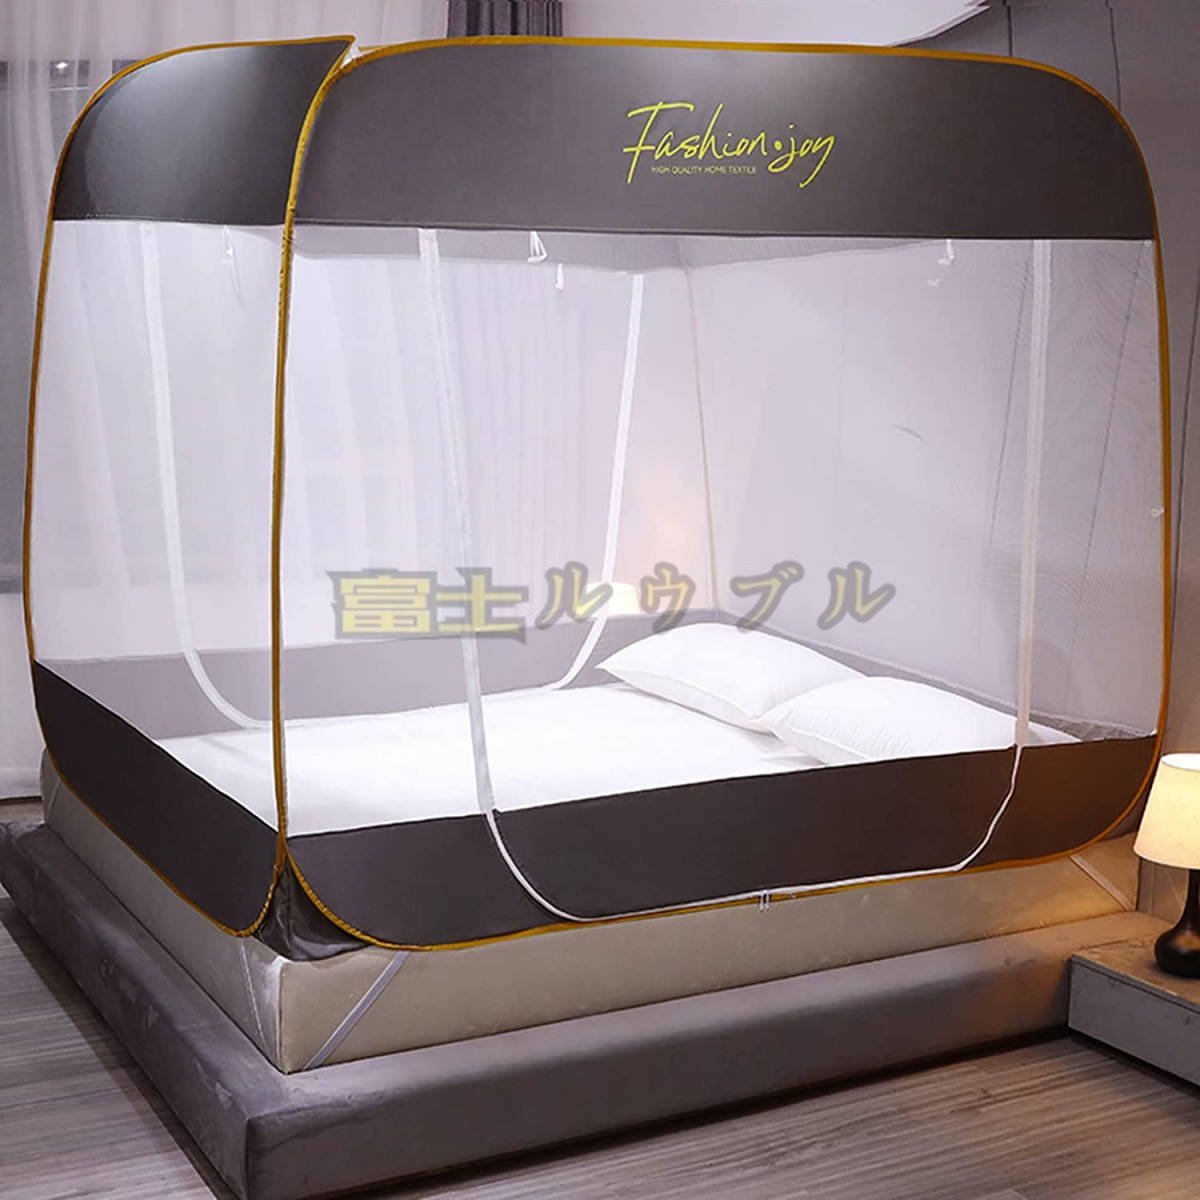  mosquito net one touch bottom attaching single bed for double bed 3 door design .. mosquito net bed for tatami large camp type storage sack attaching -120x195x155cm